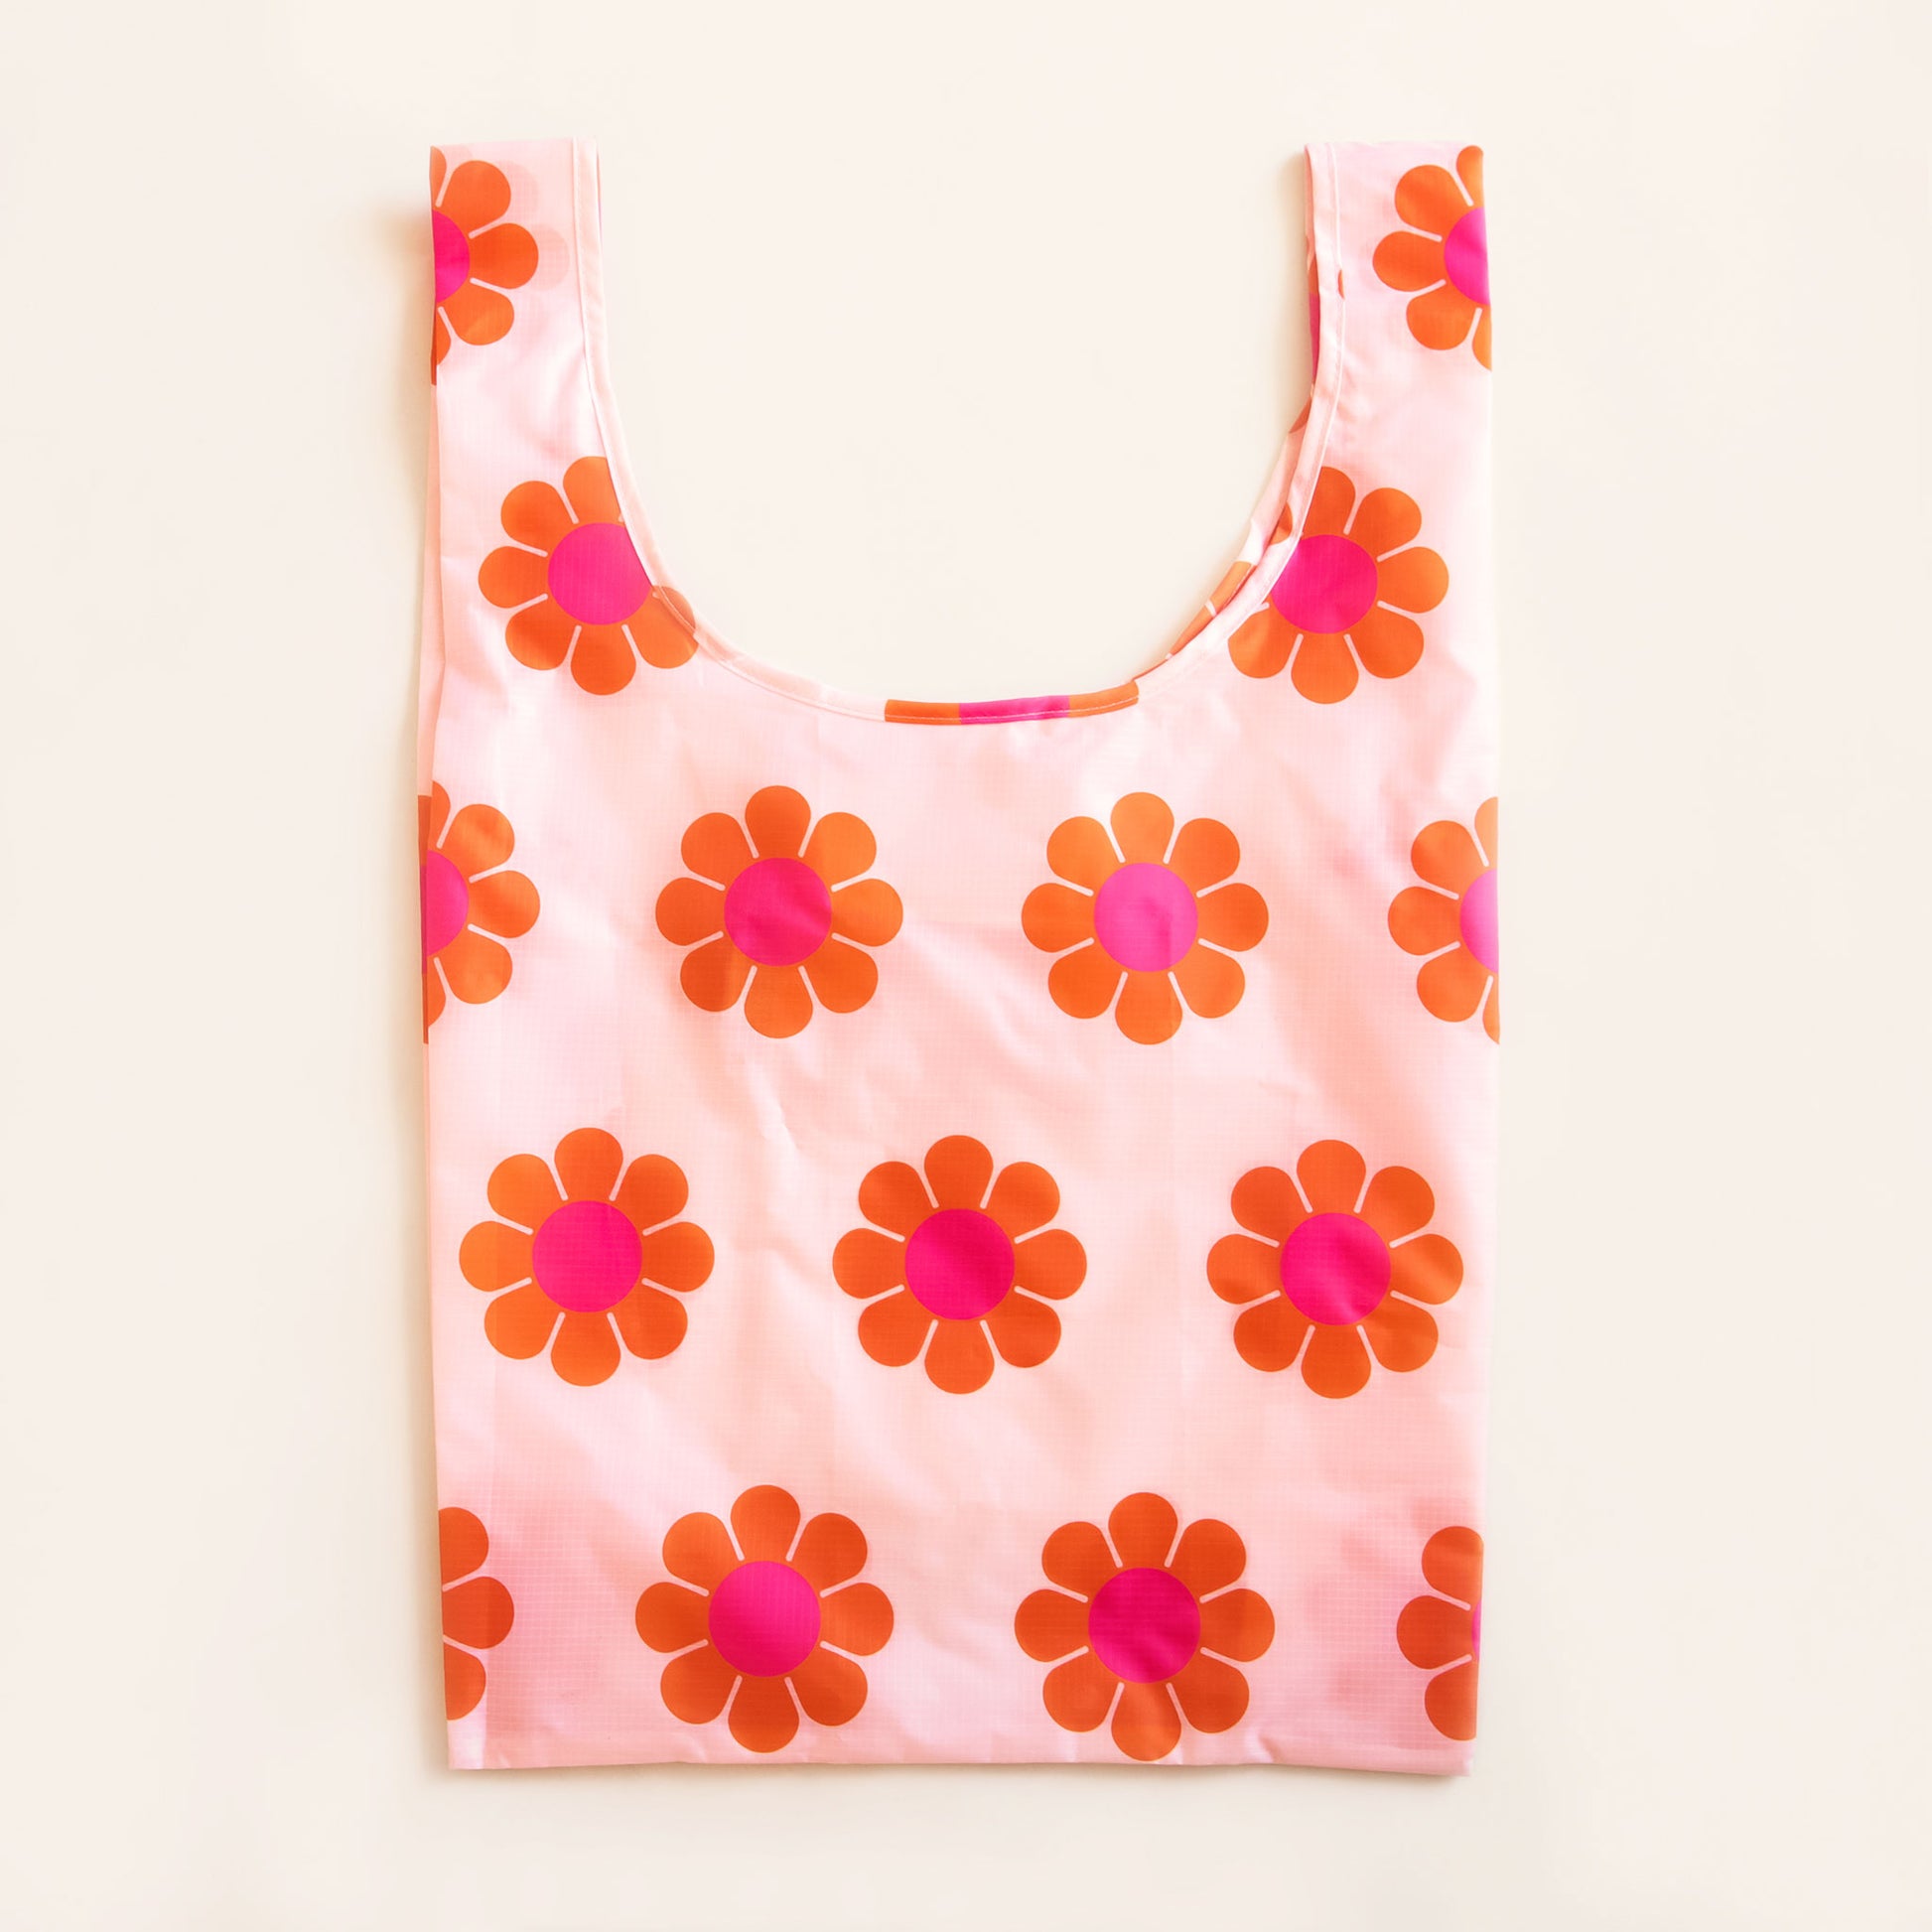 Peach reusable bag covered in a print of simple flowers with red-orange petals and magenta centers. The bag is positioned flat on a table and has a 'U' shape between two handles.